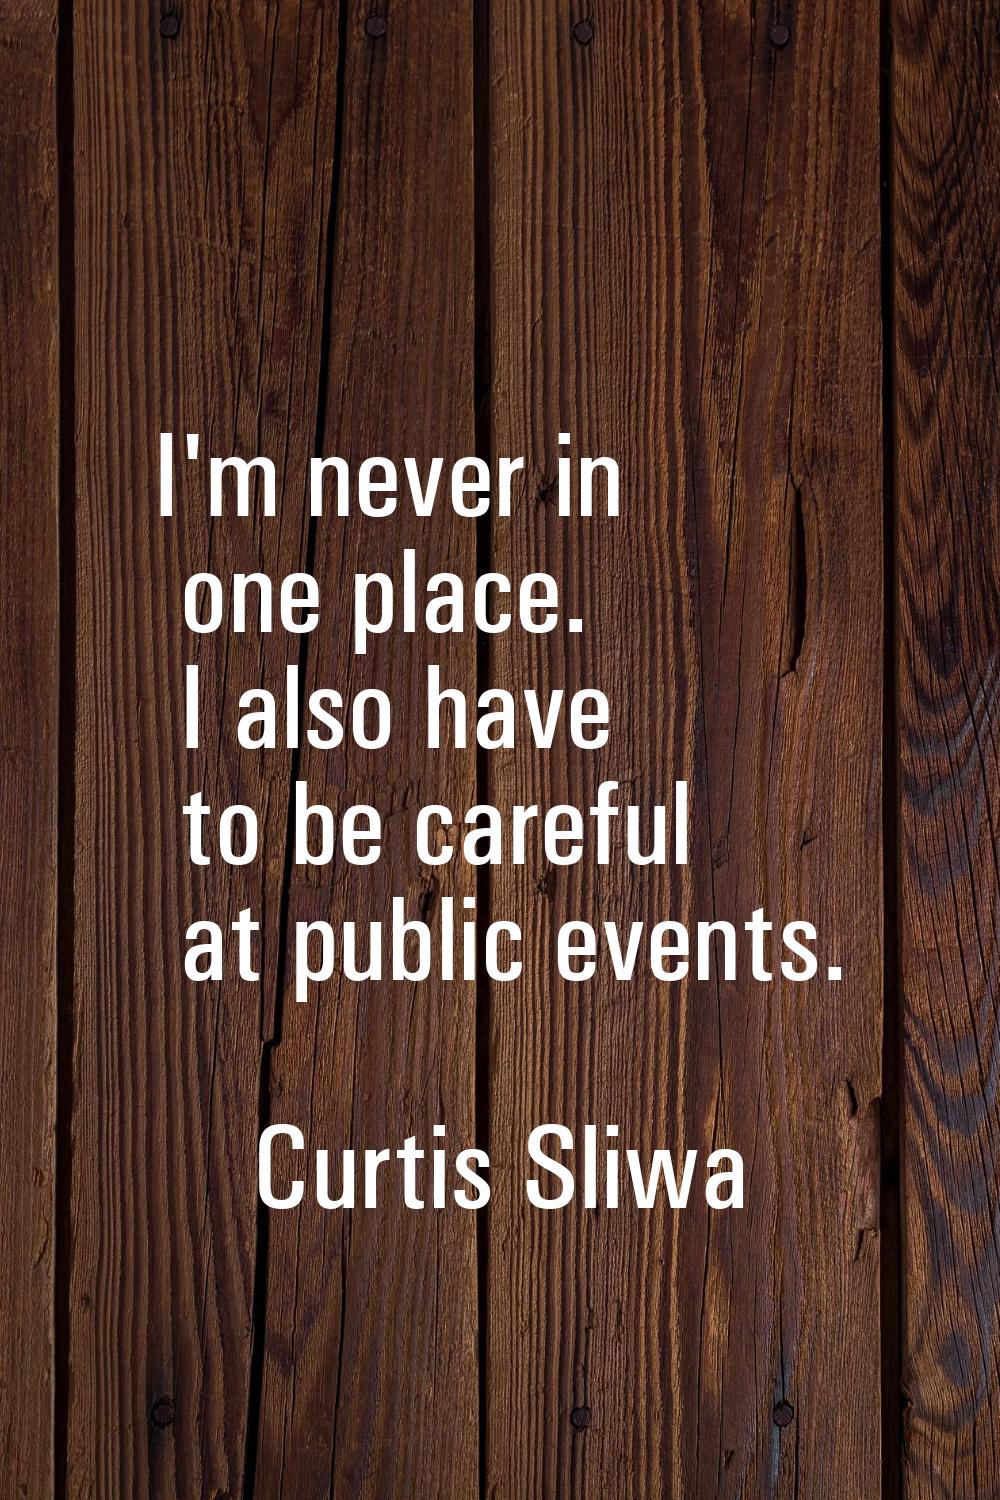 I'm never in one place. I also have to be careful at public events.